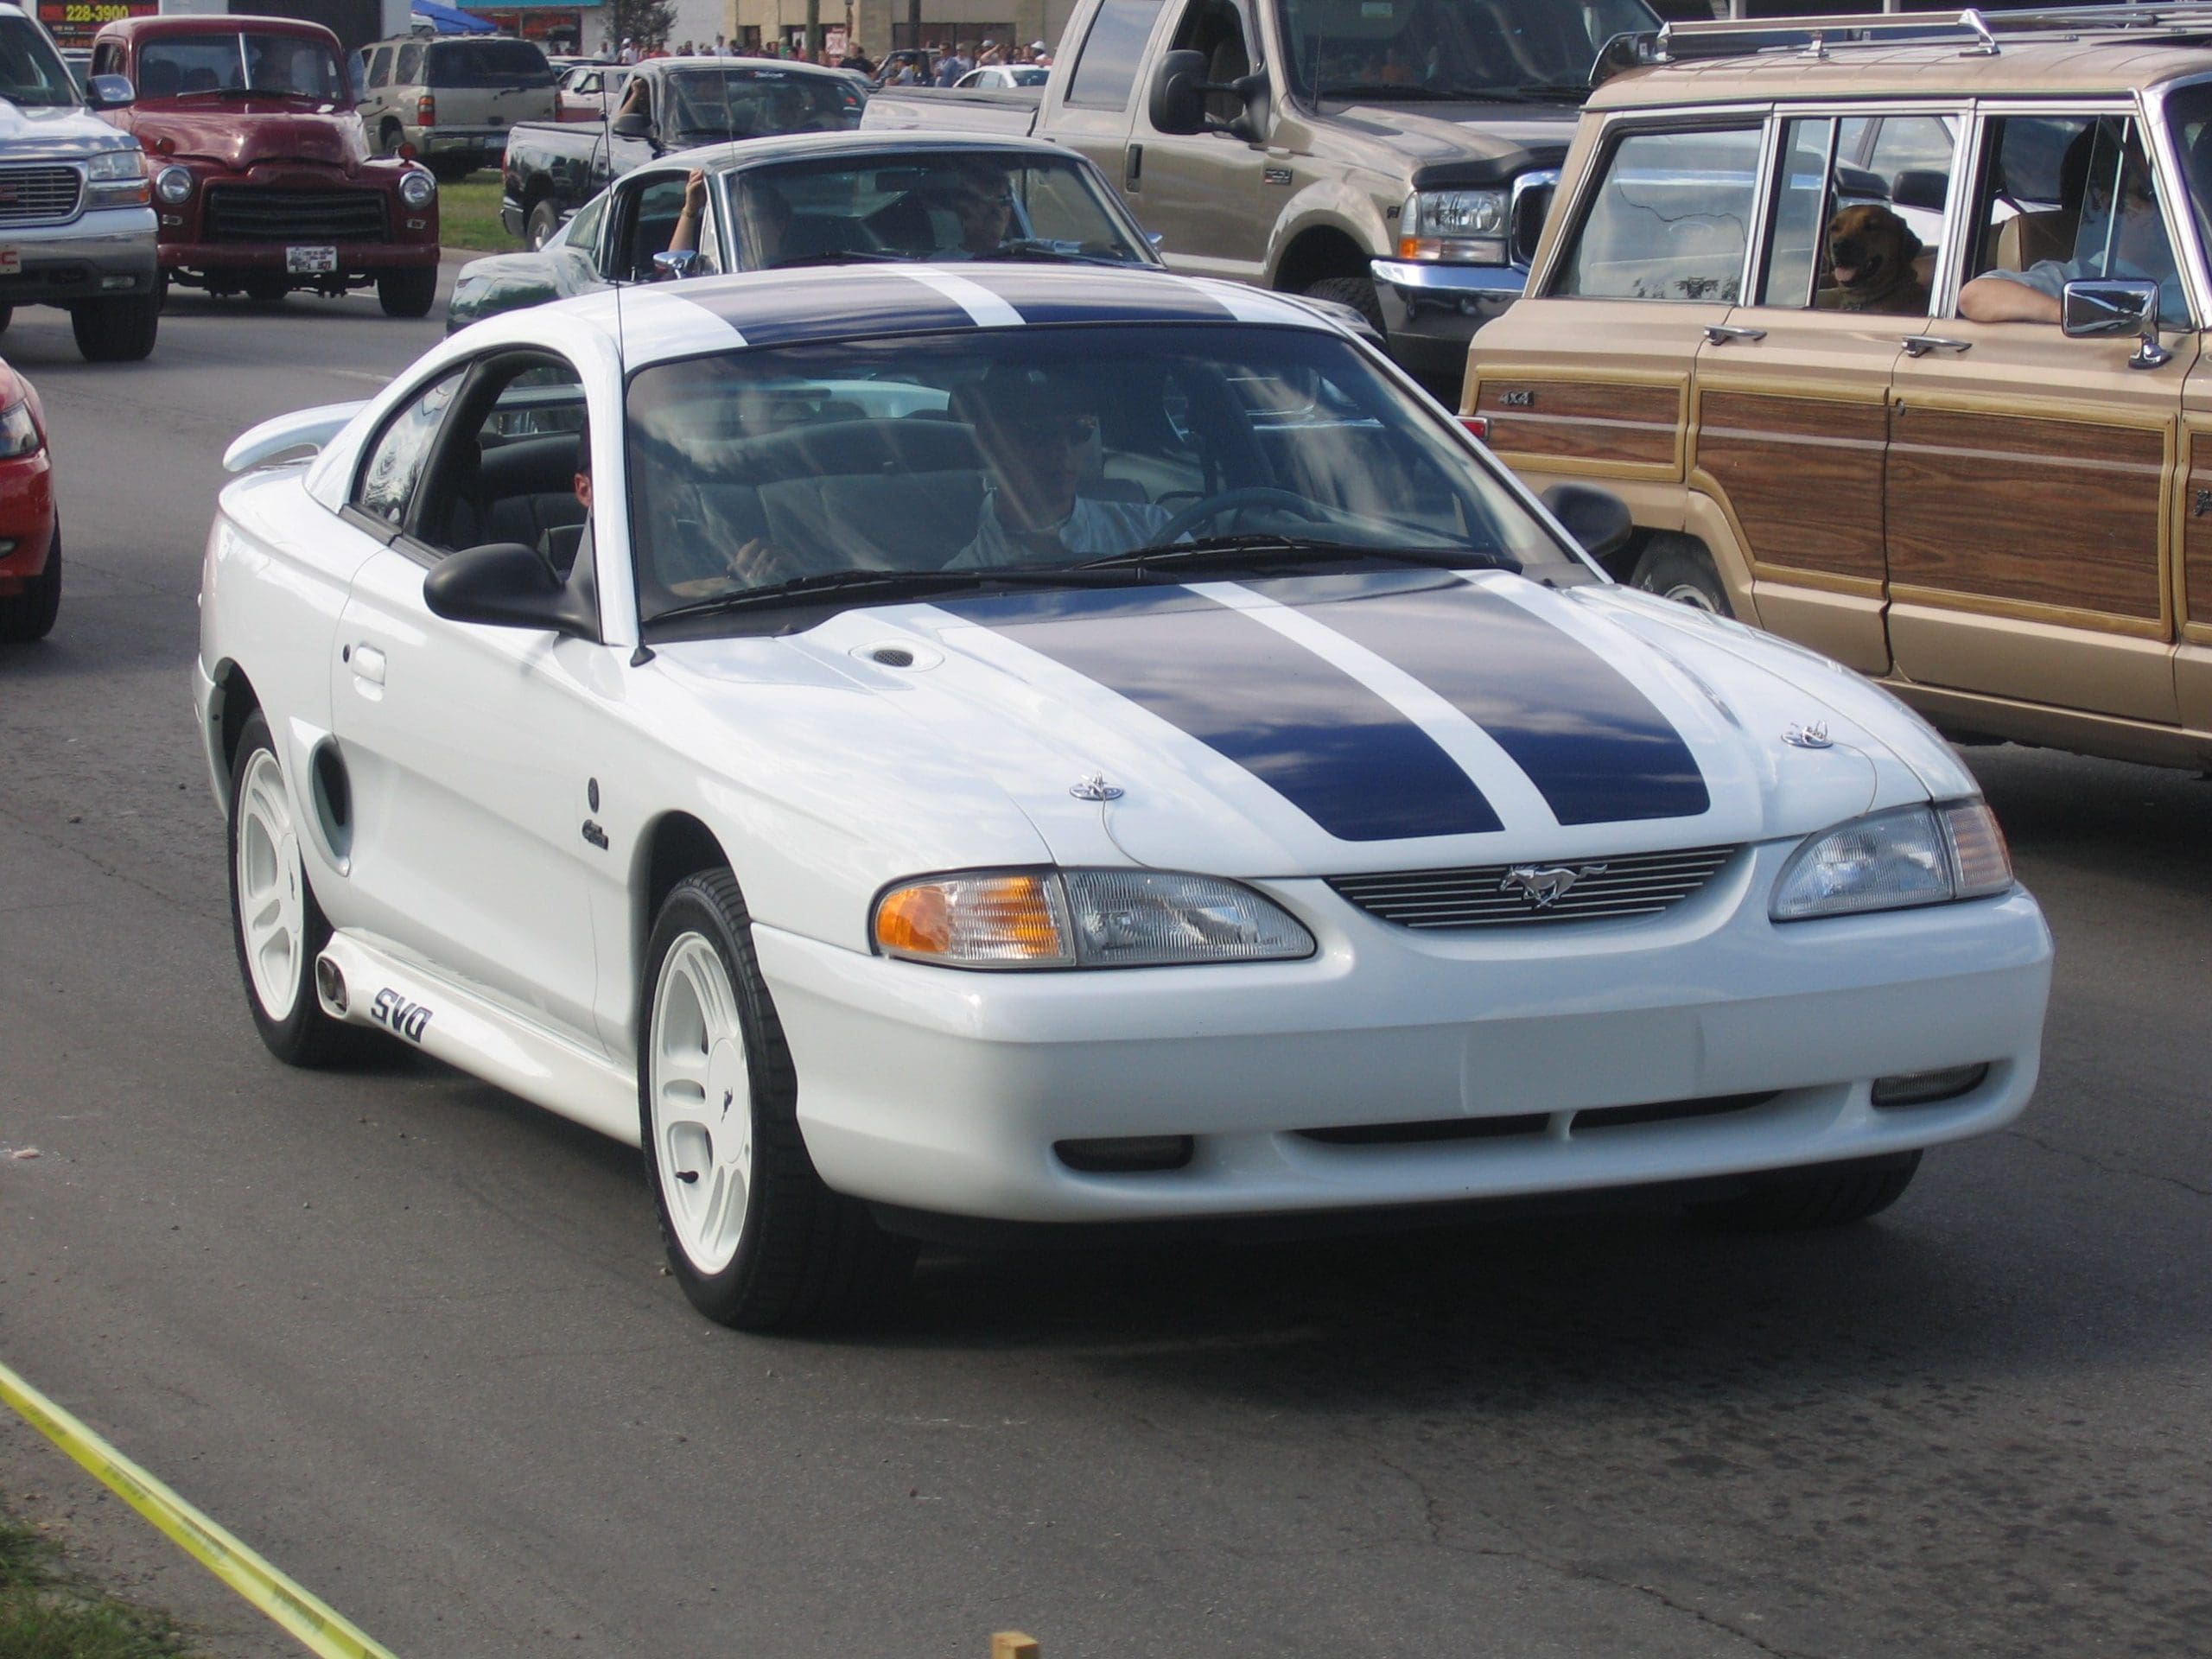 Mustang Of The Day: 1997 Ford Mustang SVO Woodward Dream Cruise